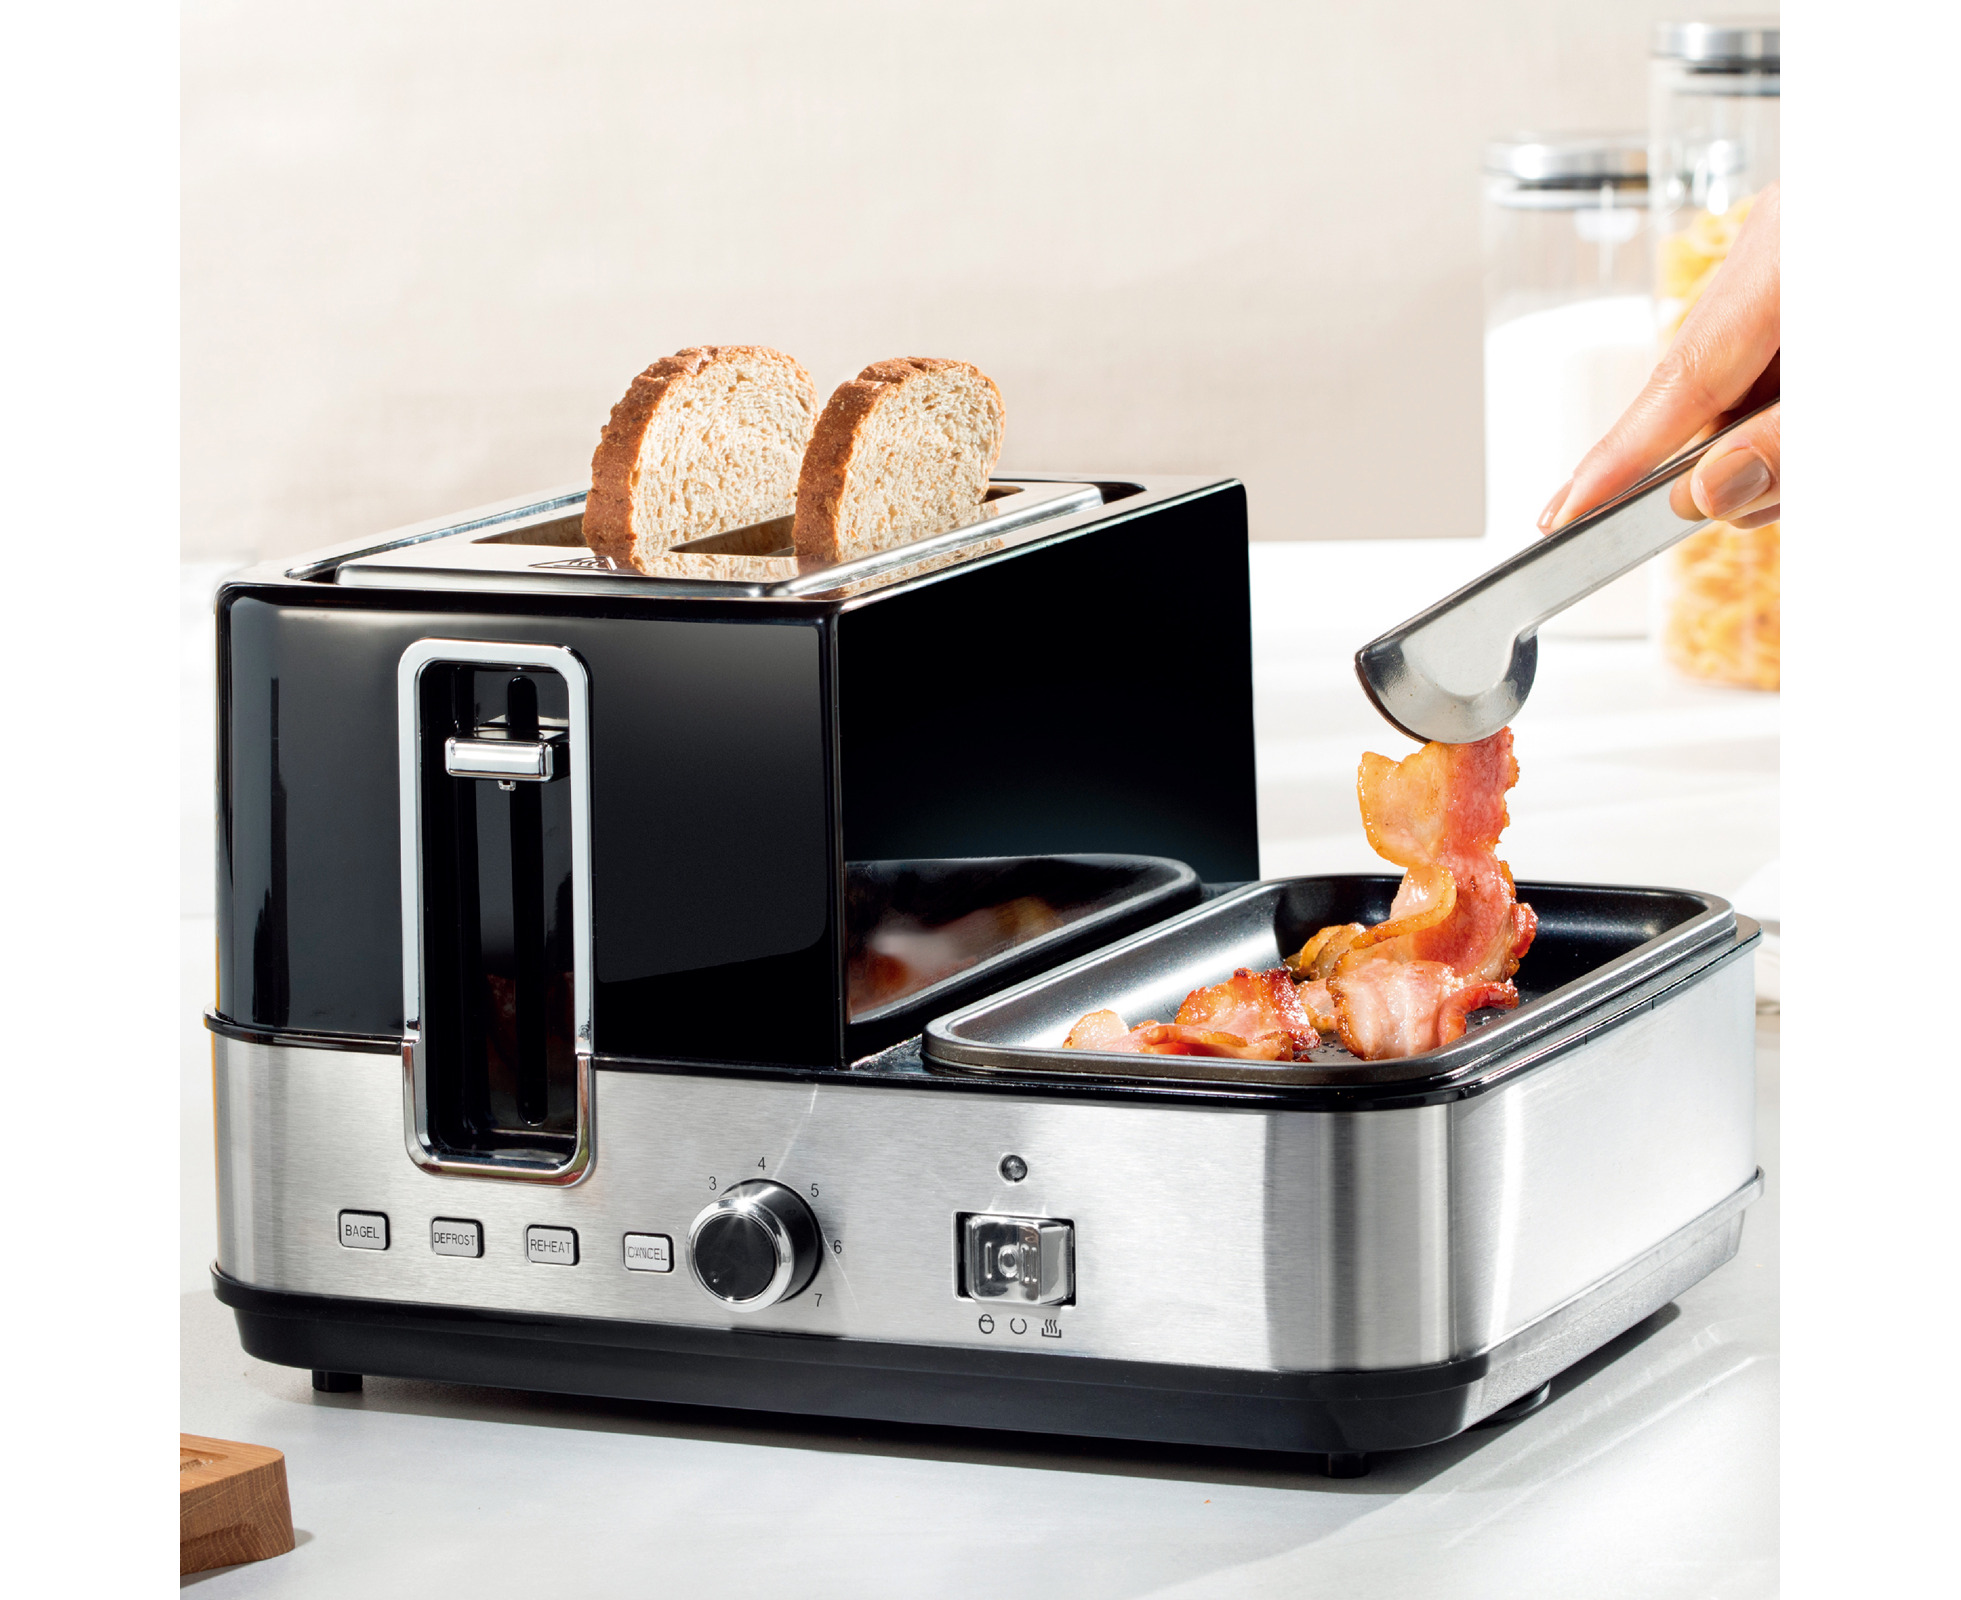 Kmart's $49 toaster and egg cooker is a breakfast game-changer